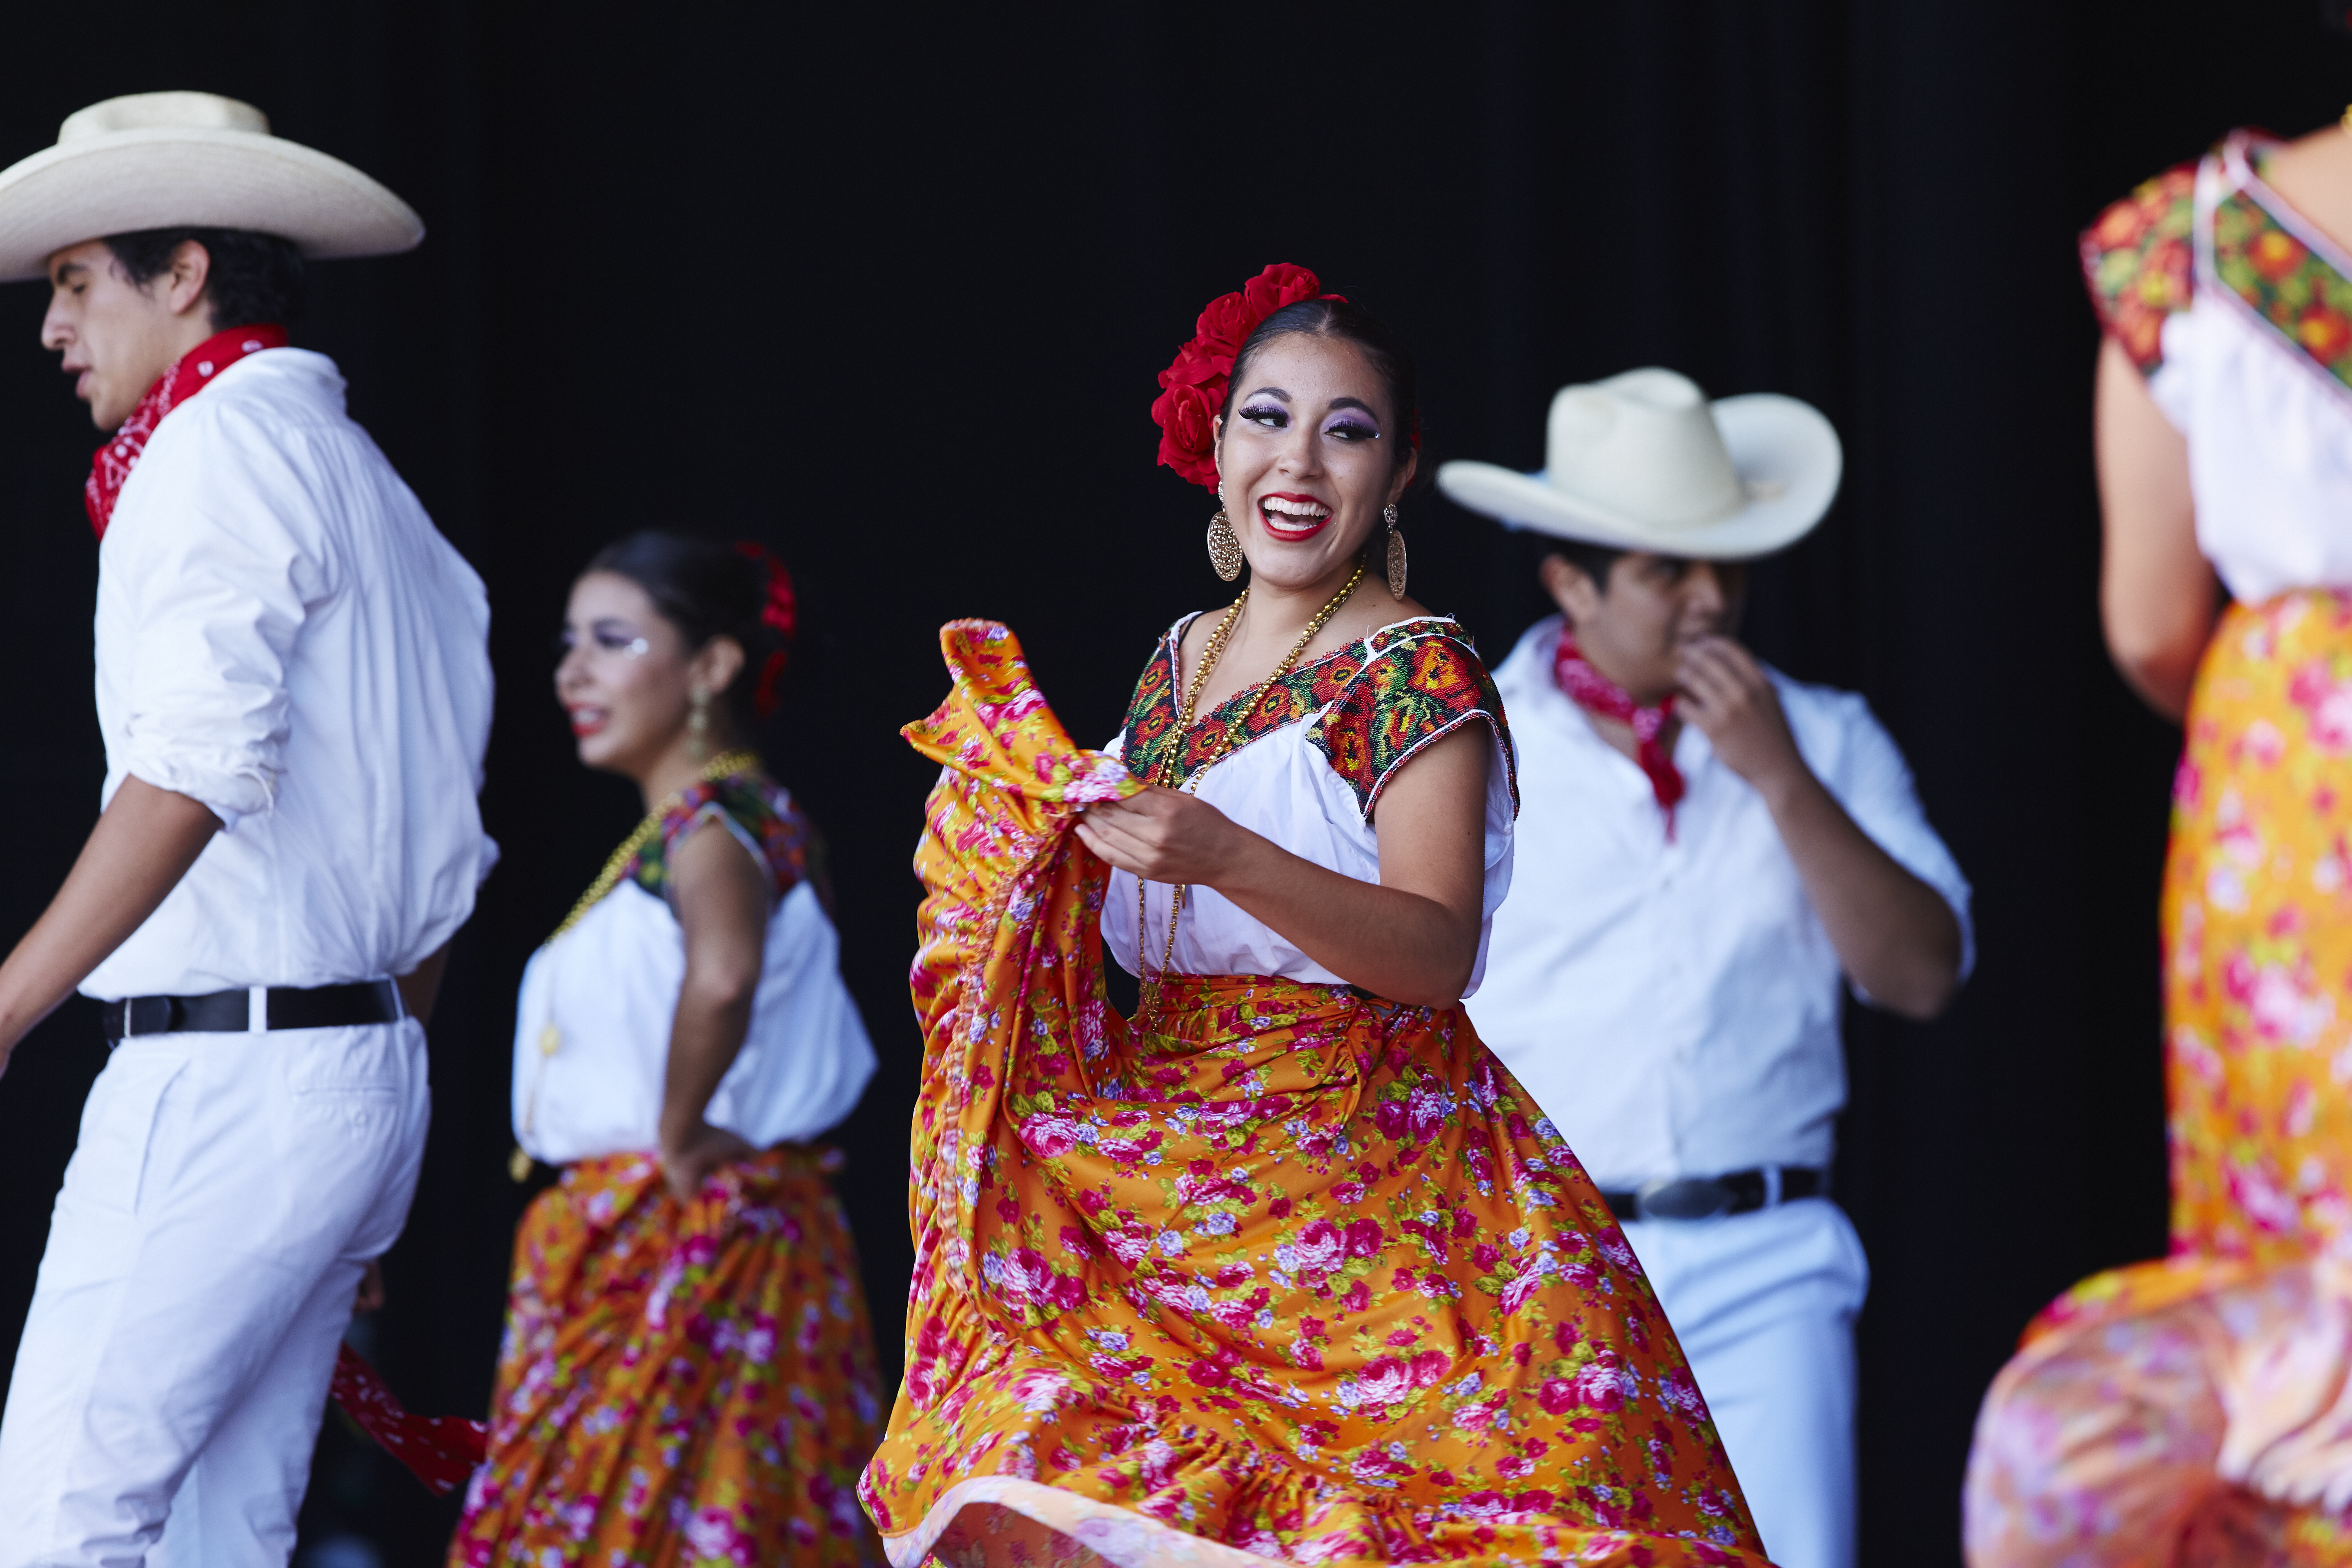 Hispanic woman smiling and dancing at a mexican fiesta